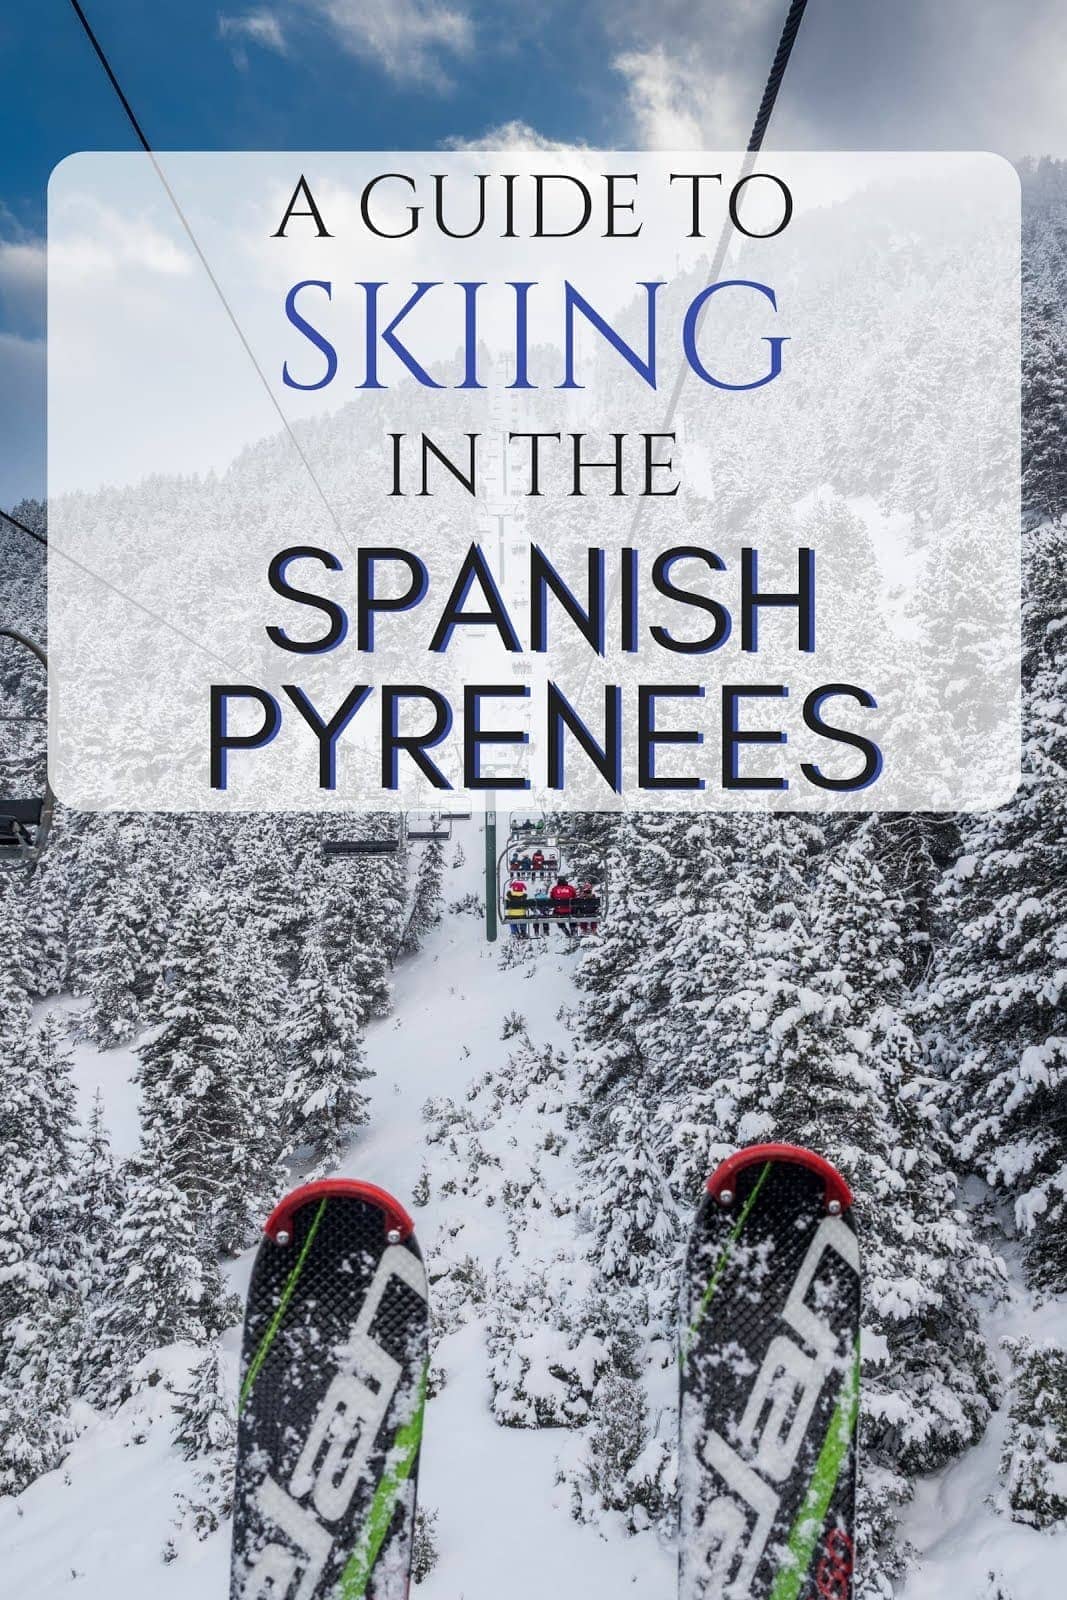 Everything you need to know about skiing and winter activities in the Spanish Pyrenees, including an overview of five resorts that are within a three hour drive of both Barcelona and Girona!